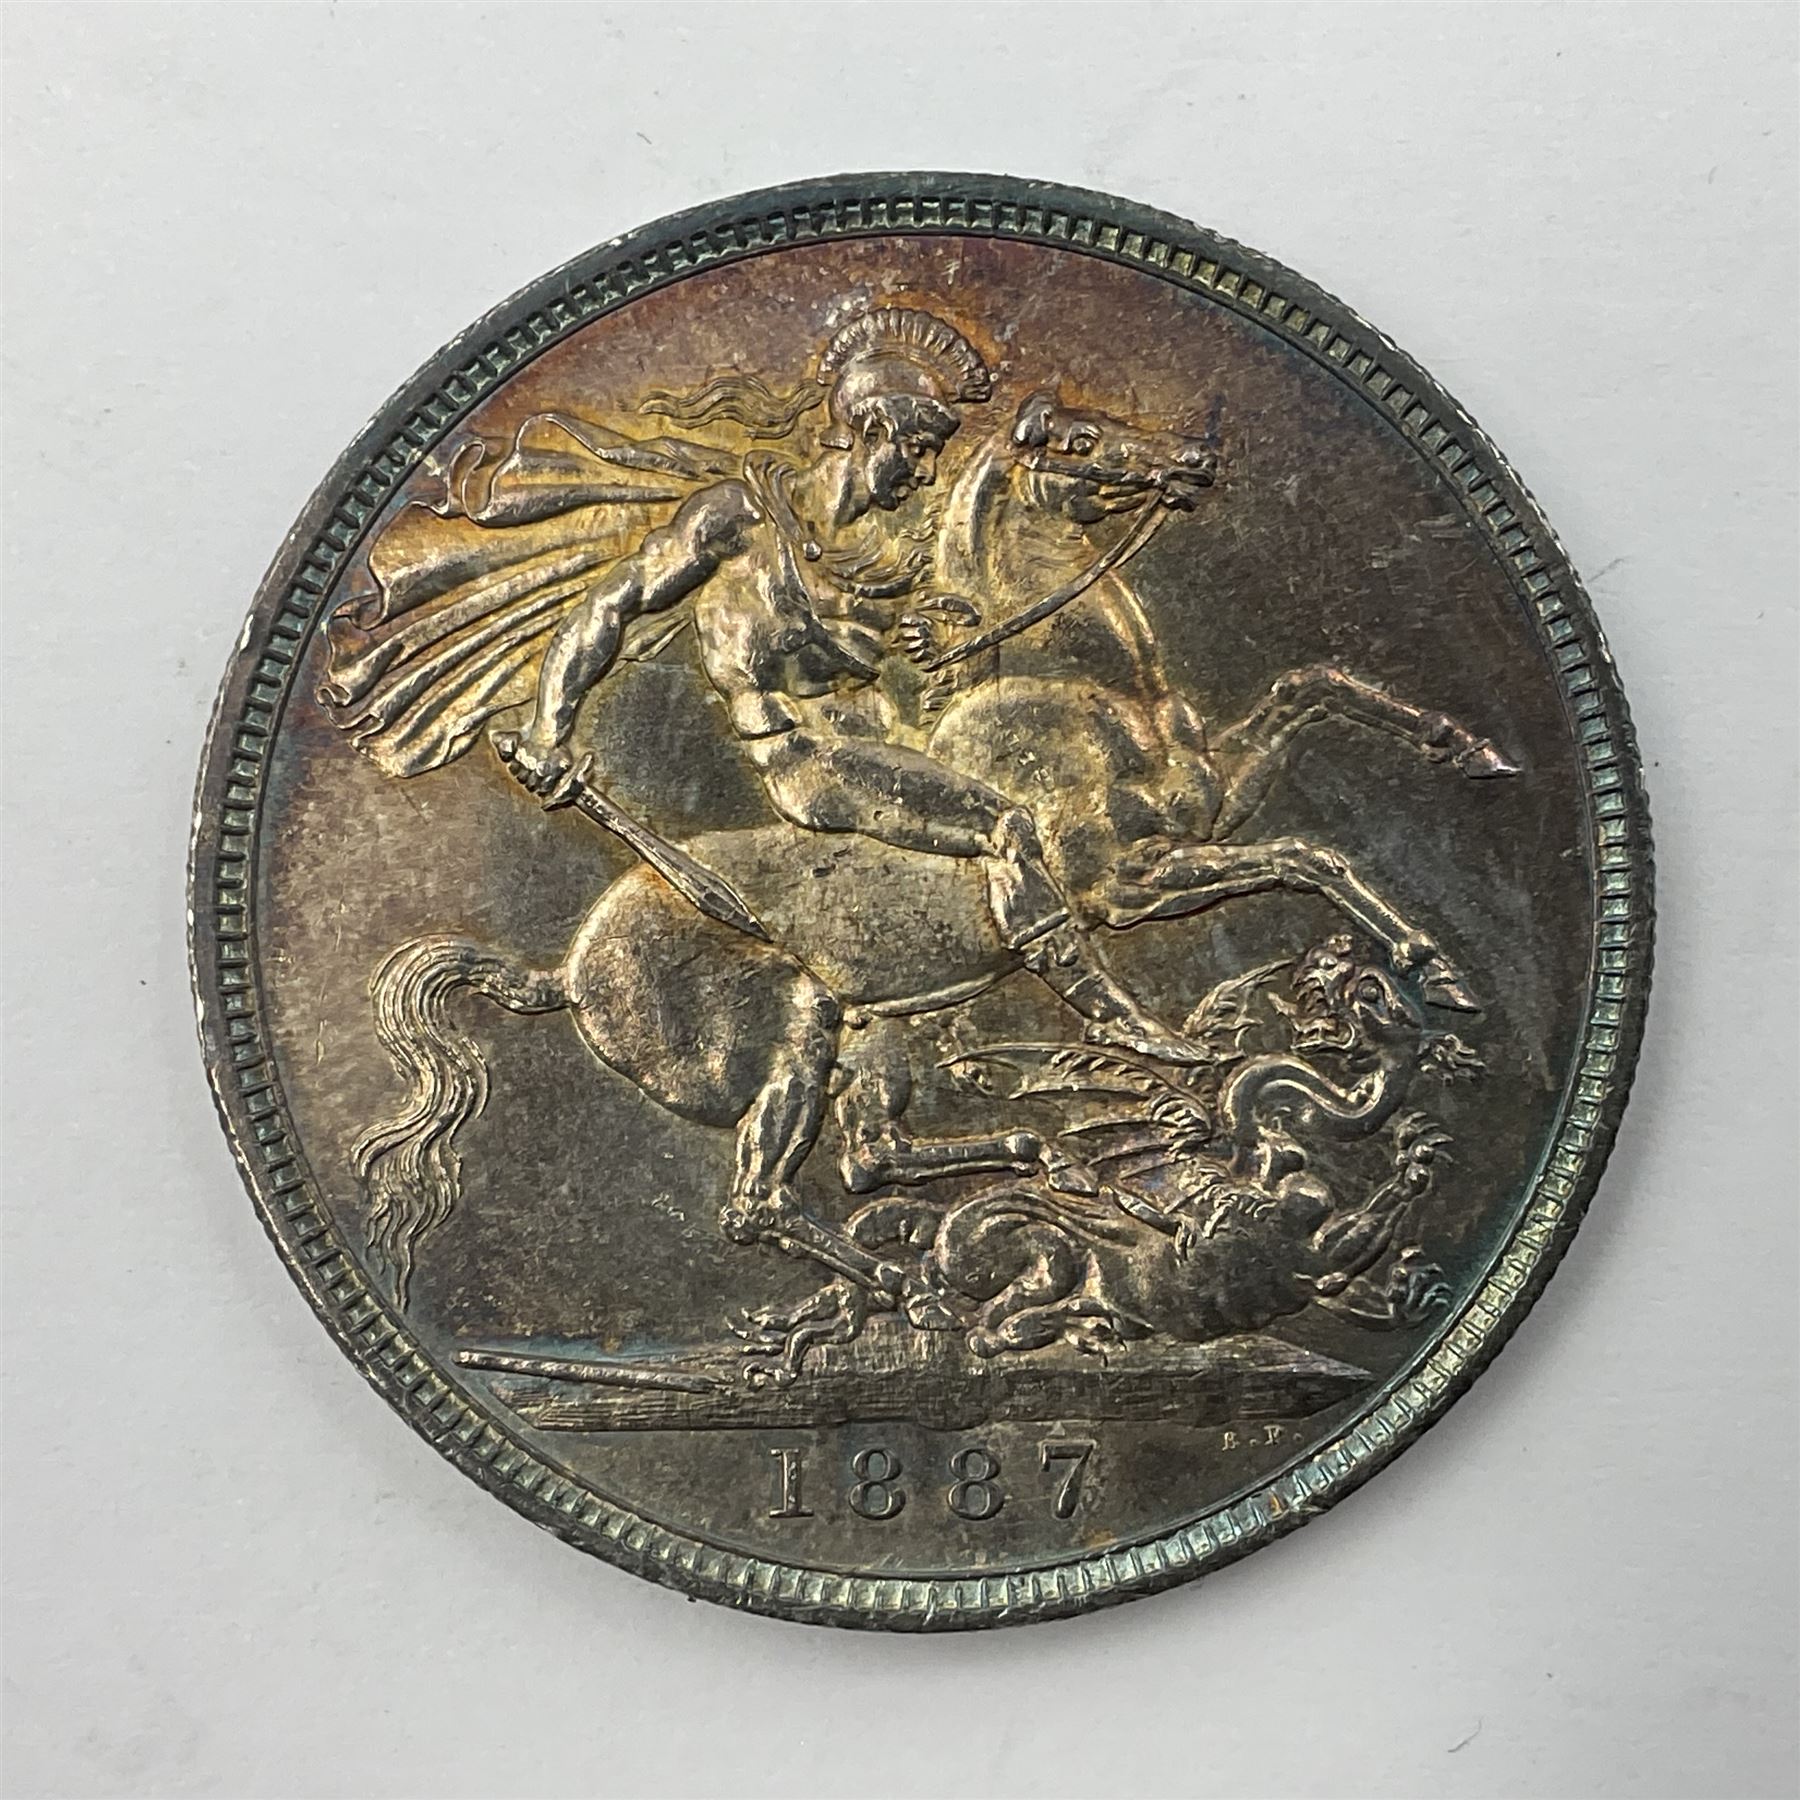 Queen Victoria 1887 silver crown coin - Image 3 of 4